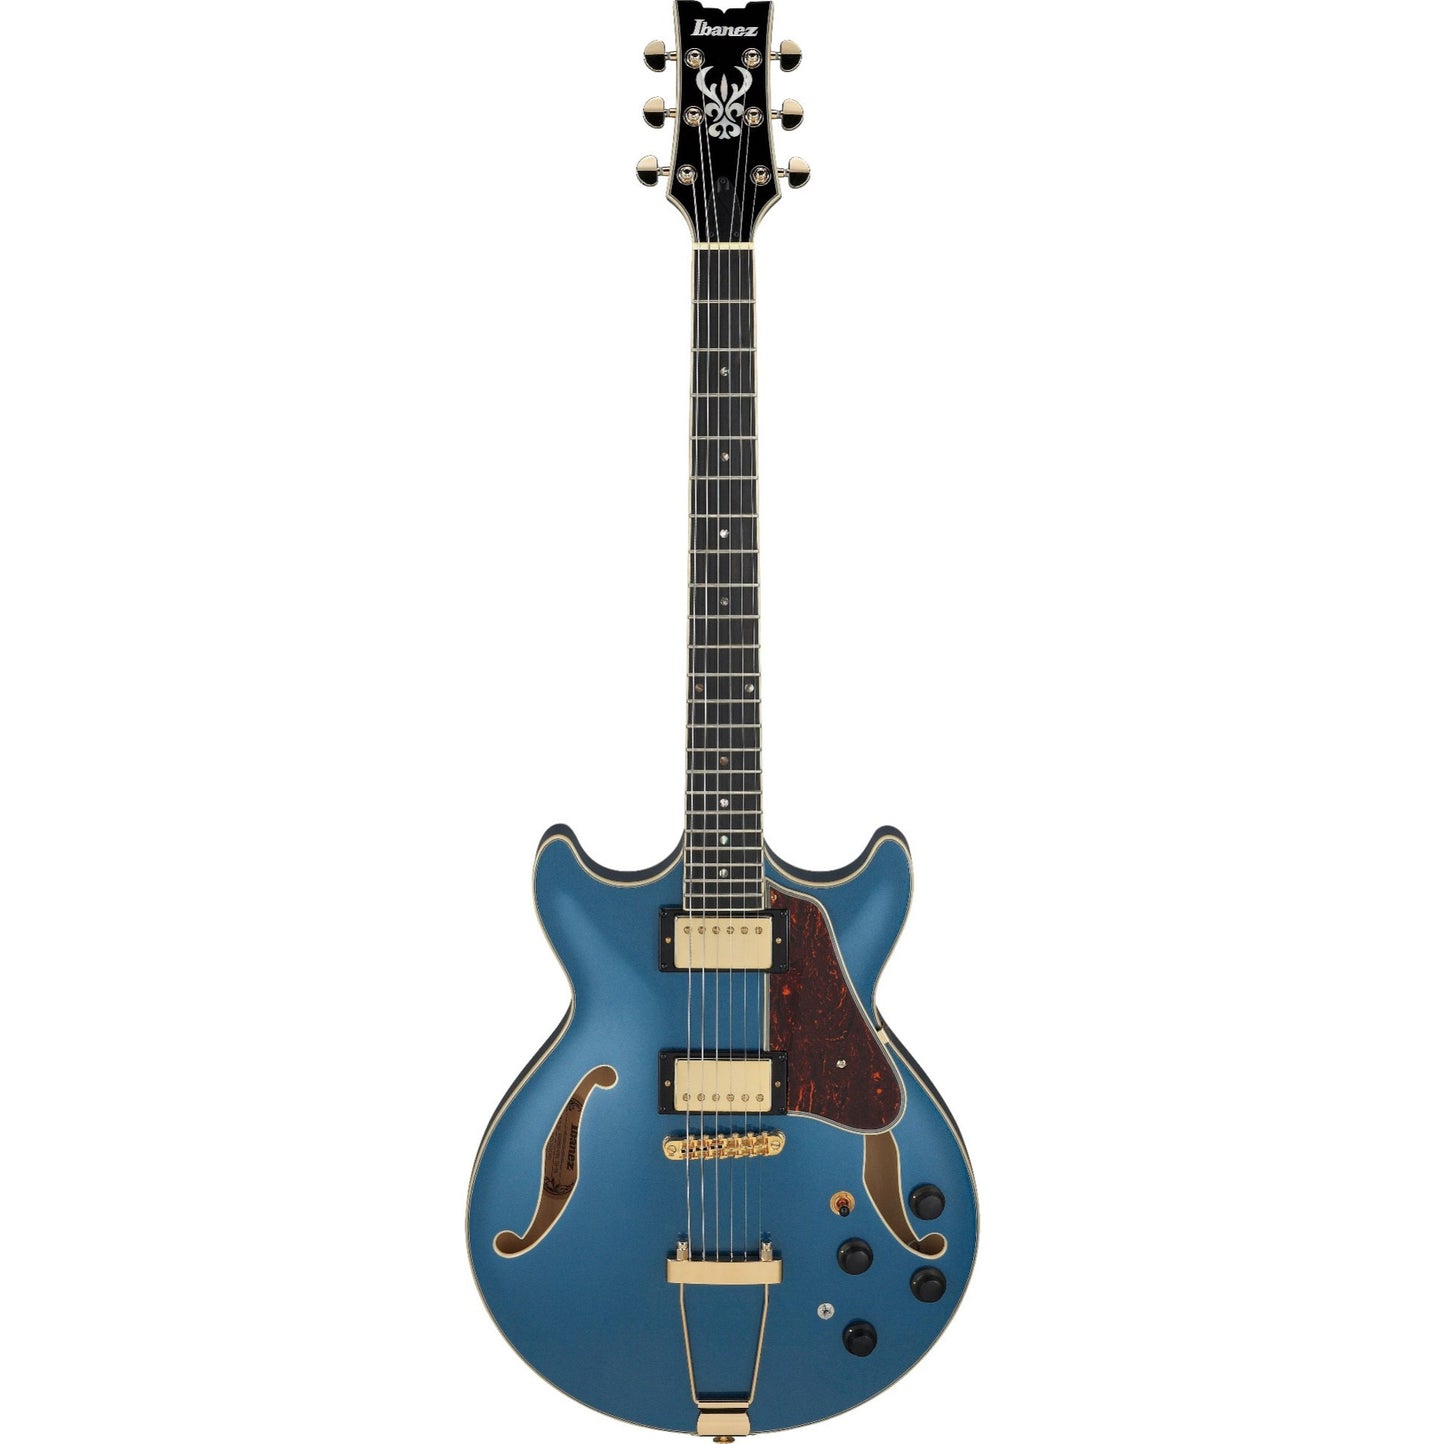 Ibanez AMH Artcore Expressionist Full-hollow Electric Guitar, Prussian Blue Metallic